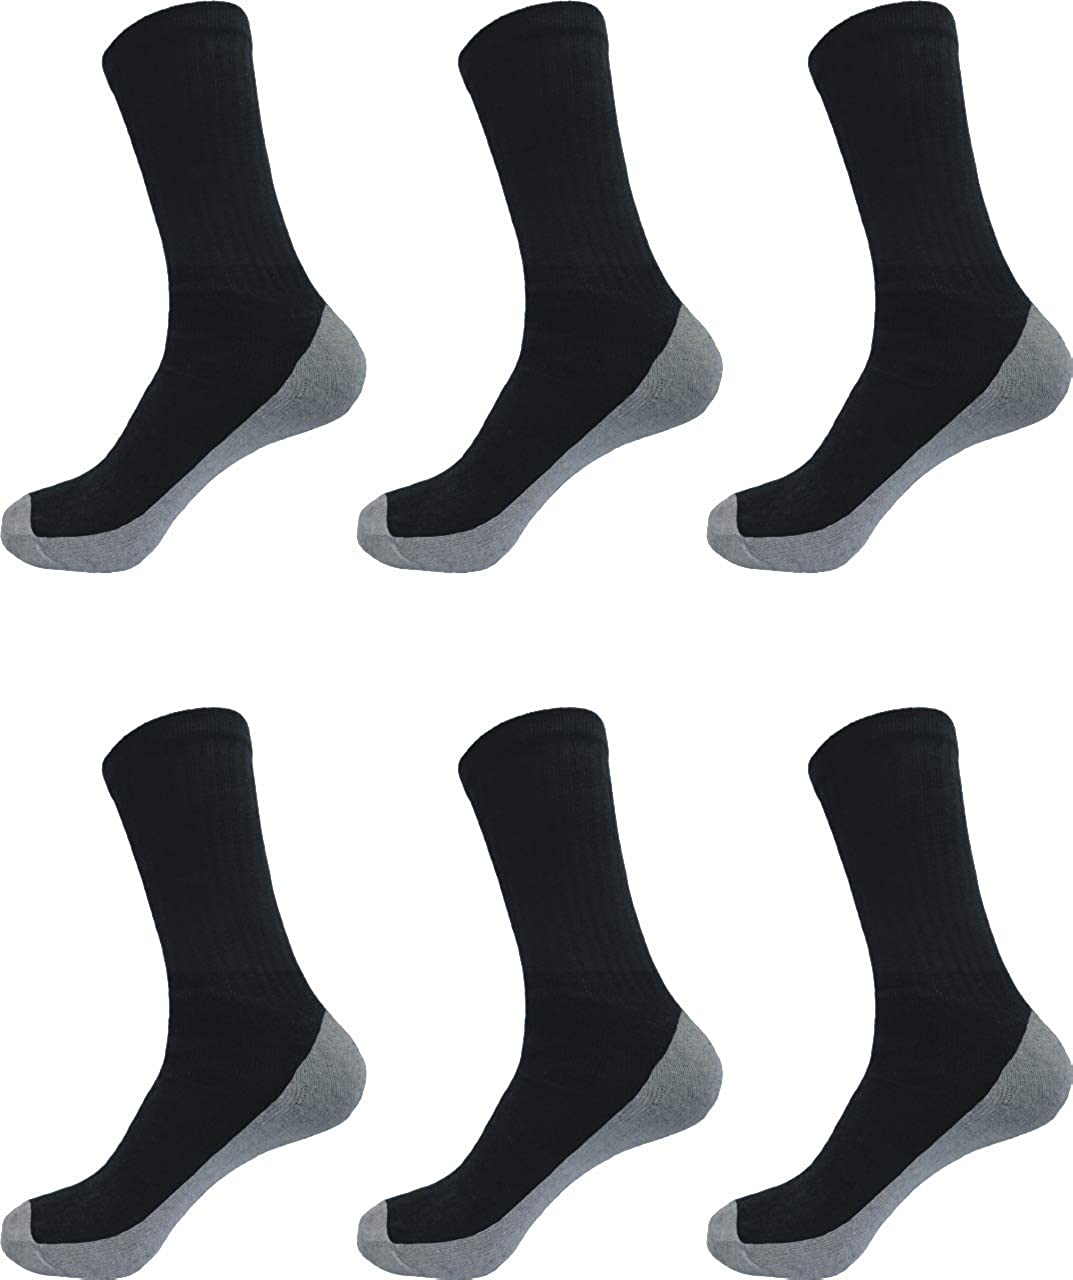 Men's Cotton Crew Socks 12 Pairs Pack Everyday Work Performance Cushion (Black With Grey Cushion, 13-15 King Size)